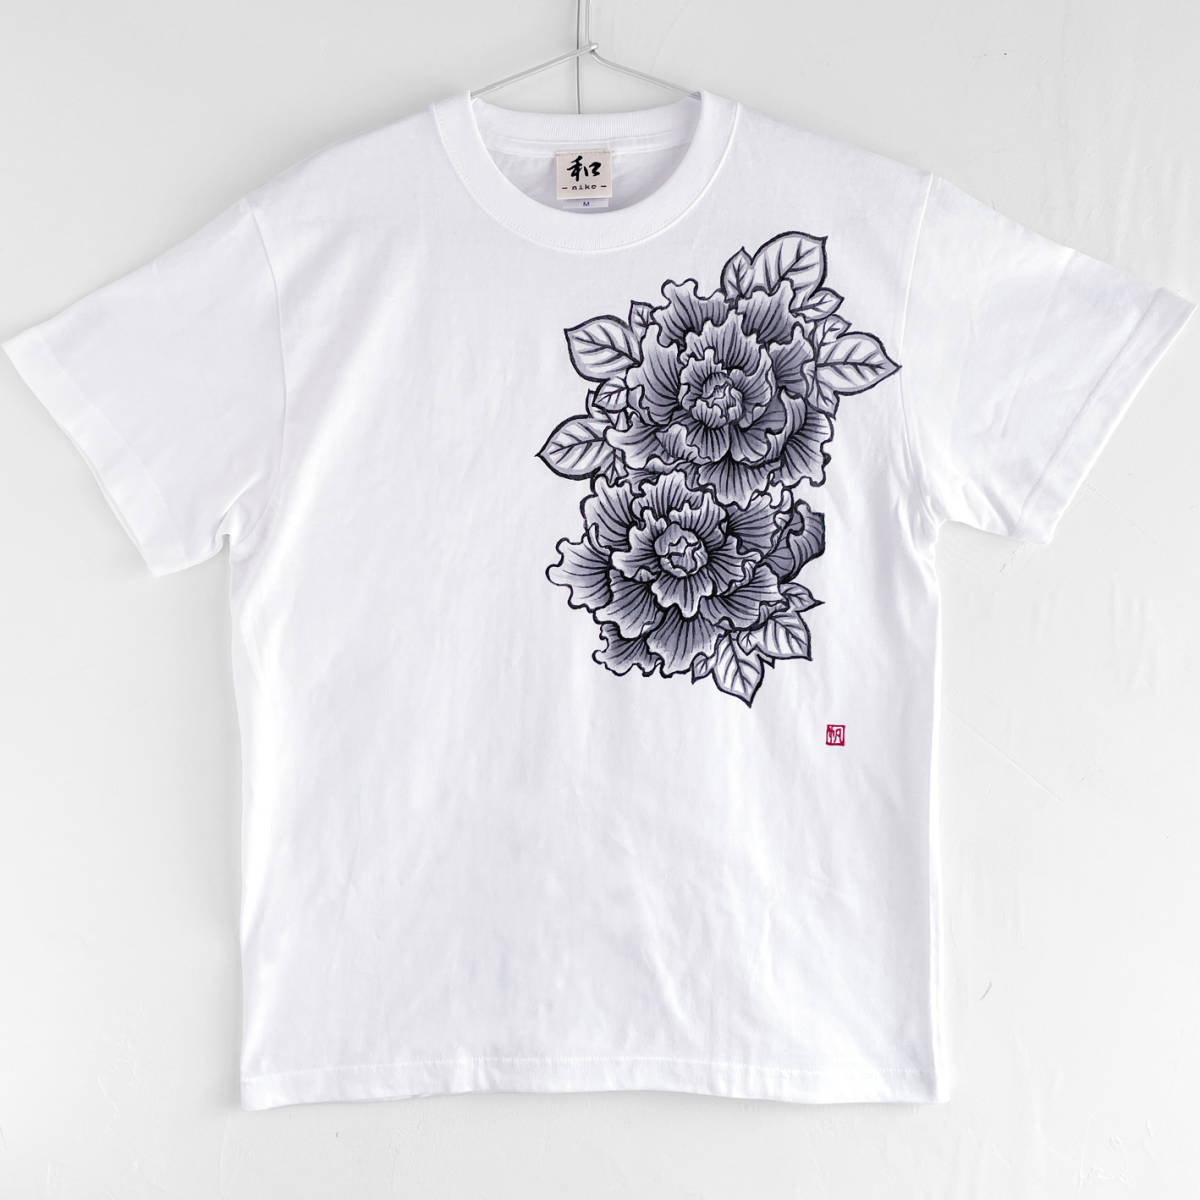 Men's T-shirt, XL size, hand-painted peony pattern T-shirt, white, hand-painted peony floral pattern T-shirt, Japanese pattern, XL size and above, Crew neck, Patterned